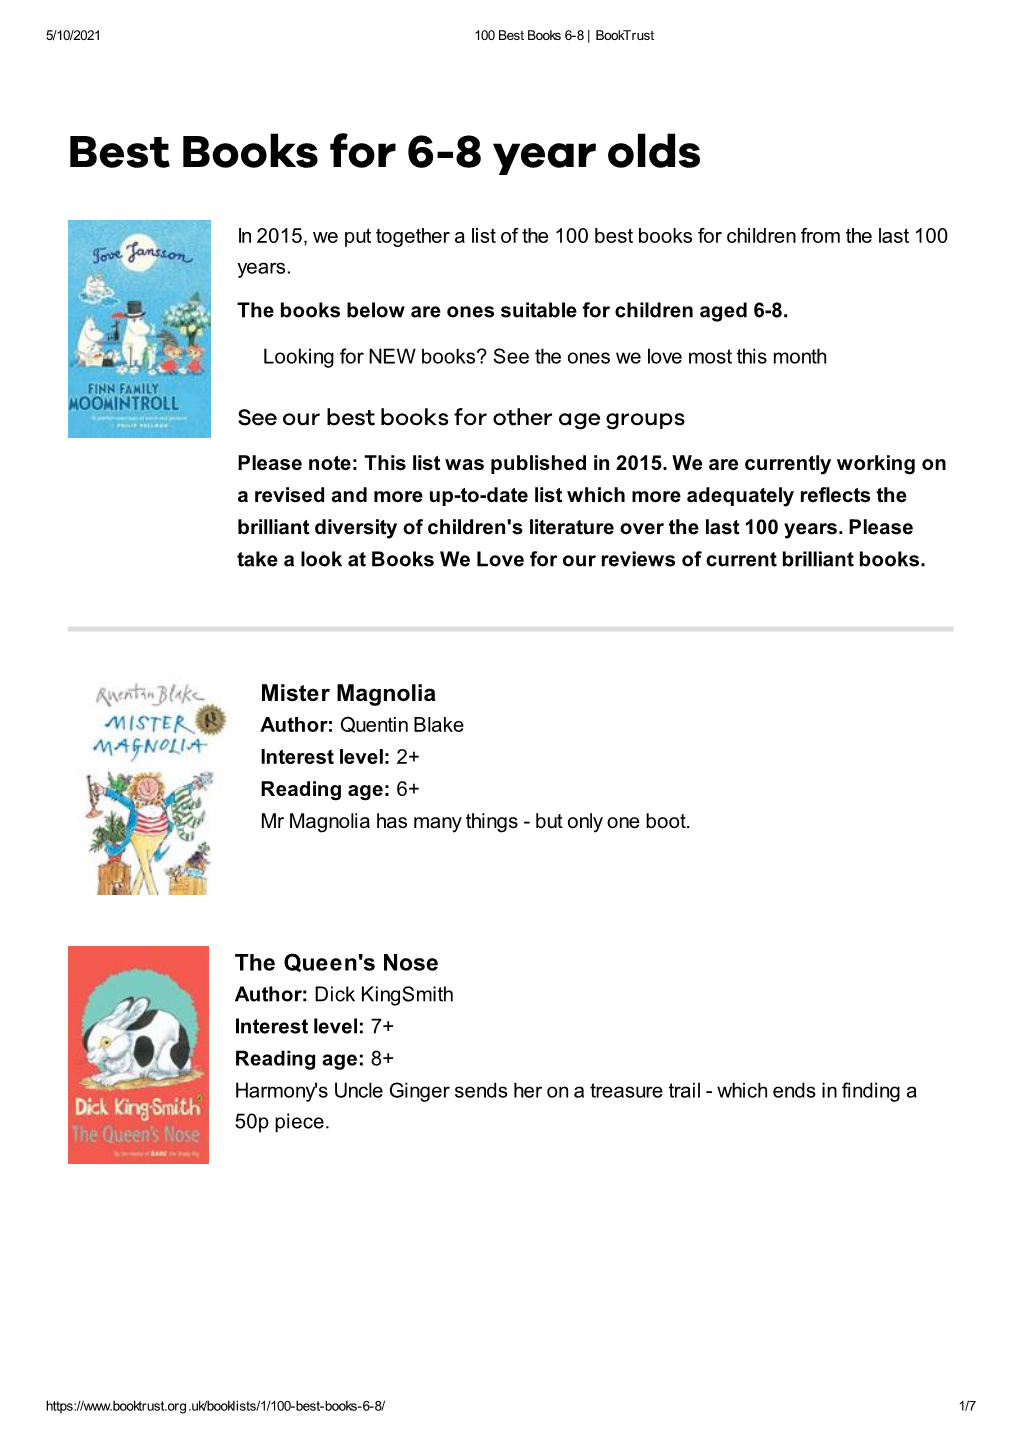 Best Books for 6-8 Year Olds